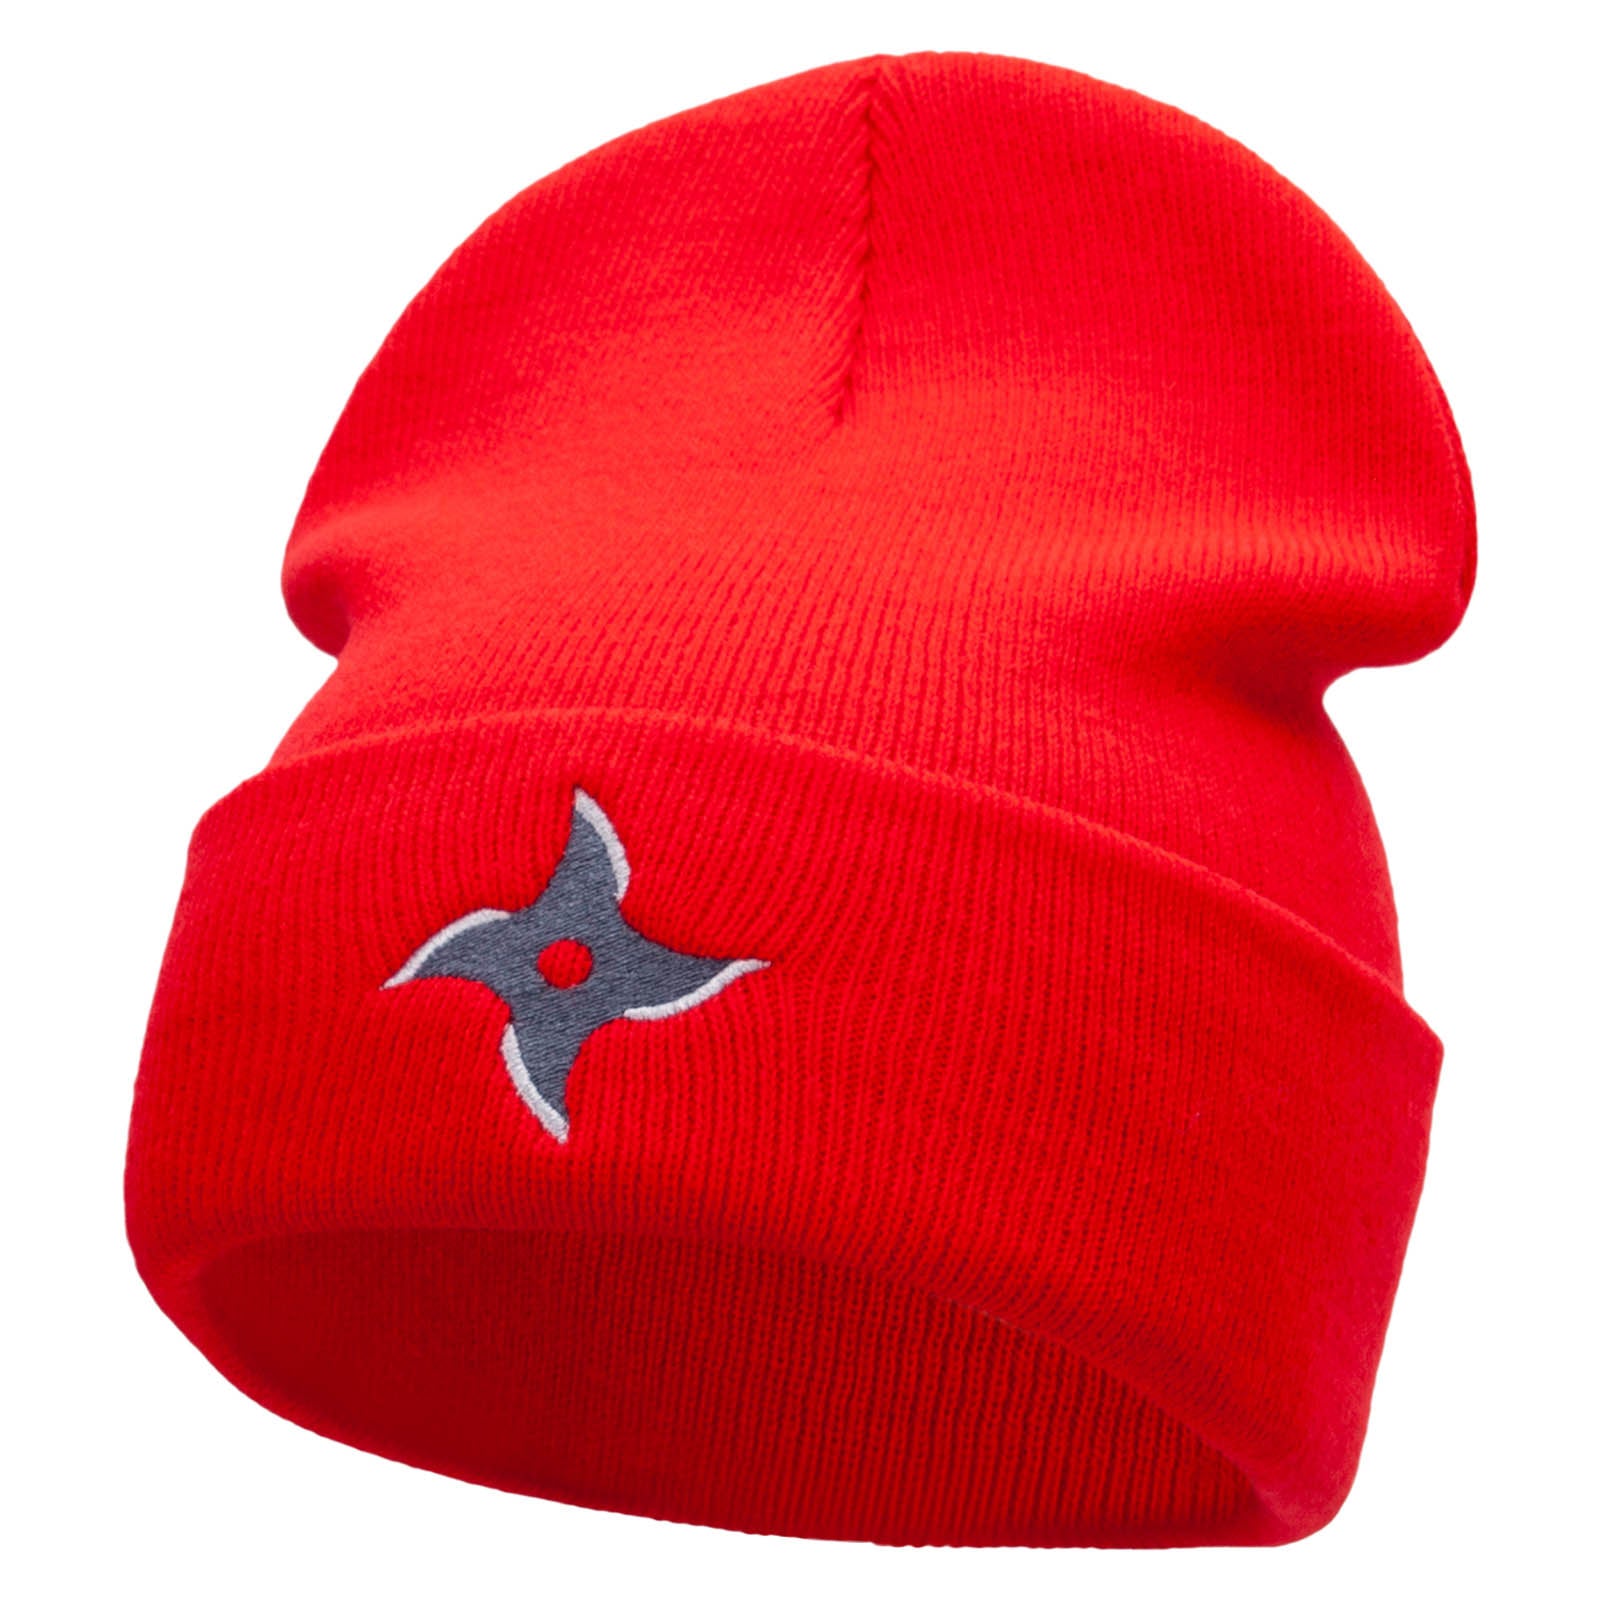 Ninja Star Embroidered 12 Inch Long Knitted Beanie - Red OSFM